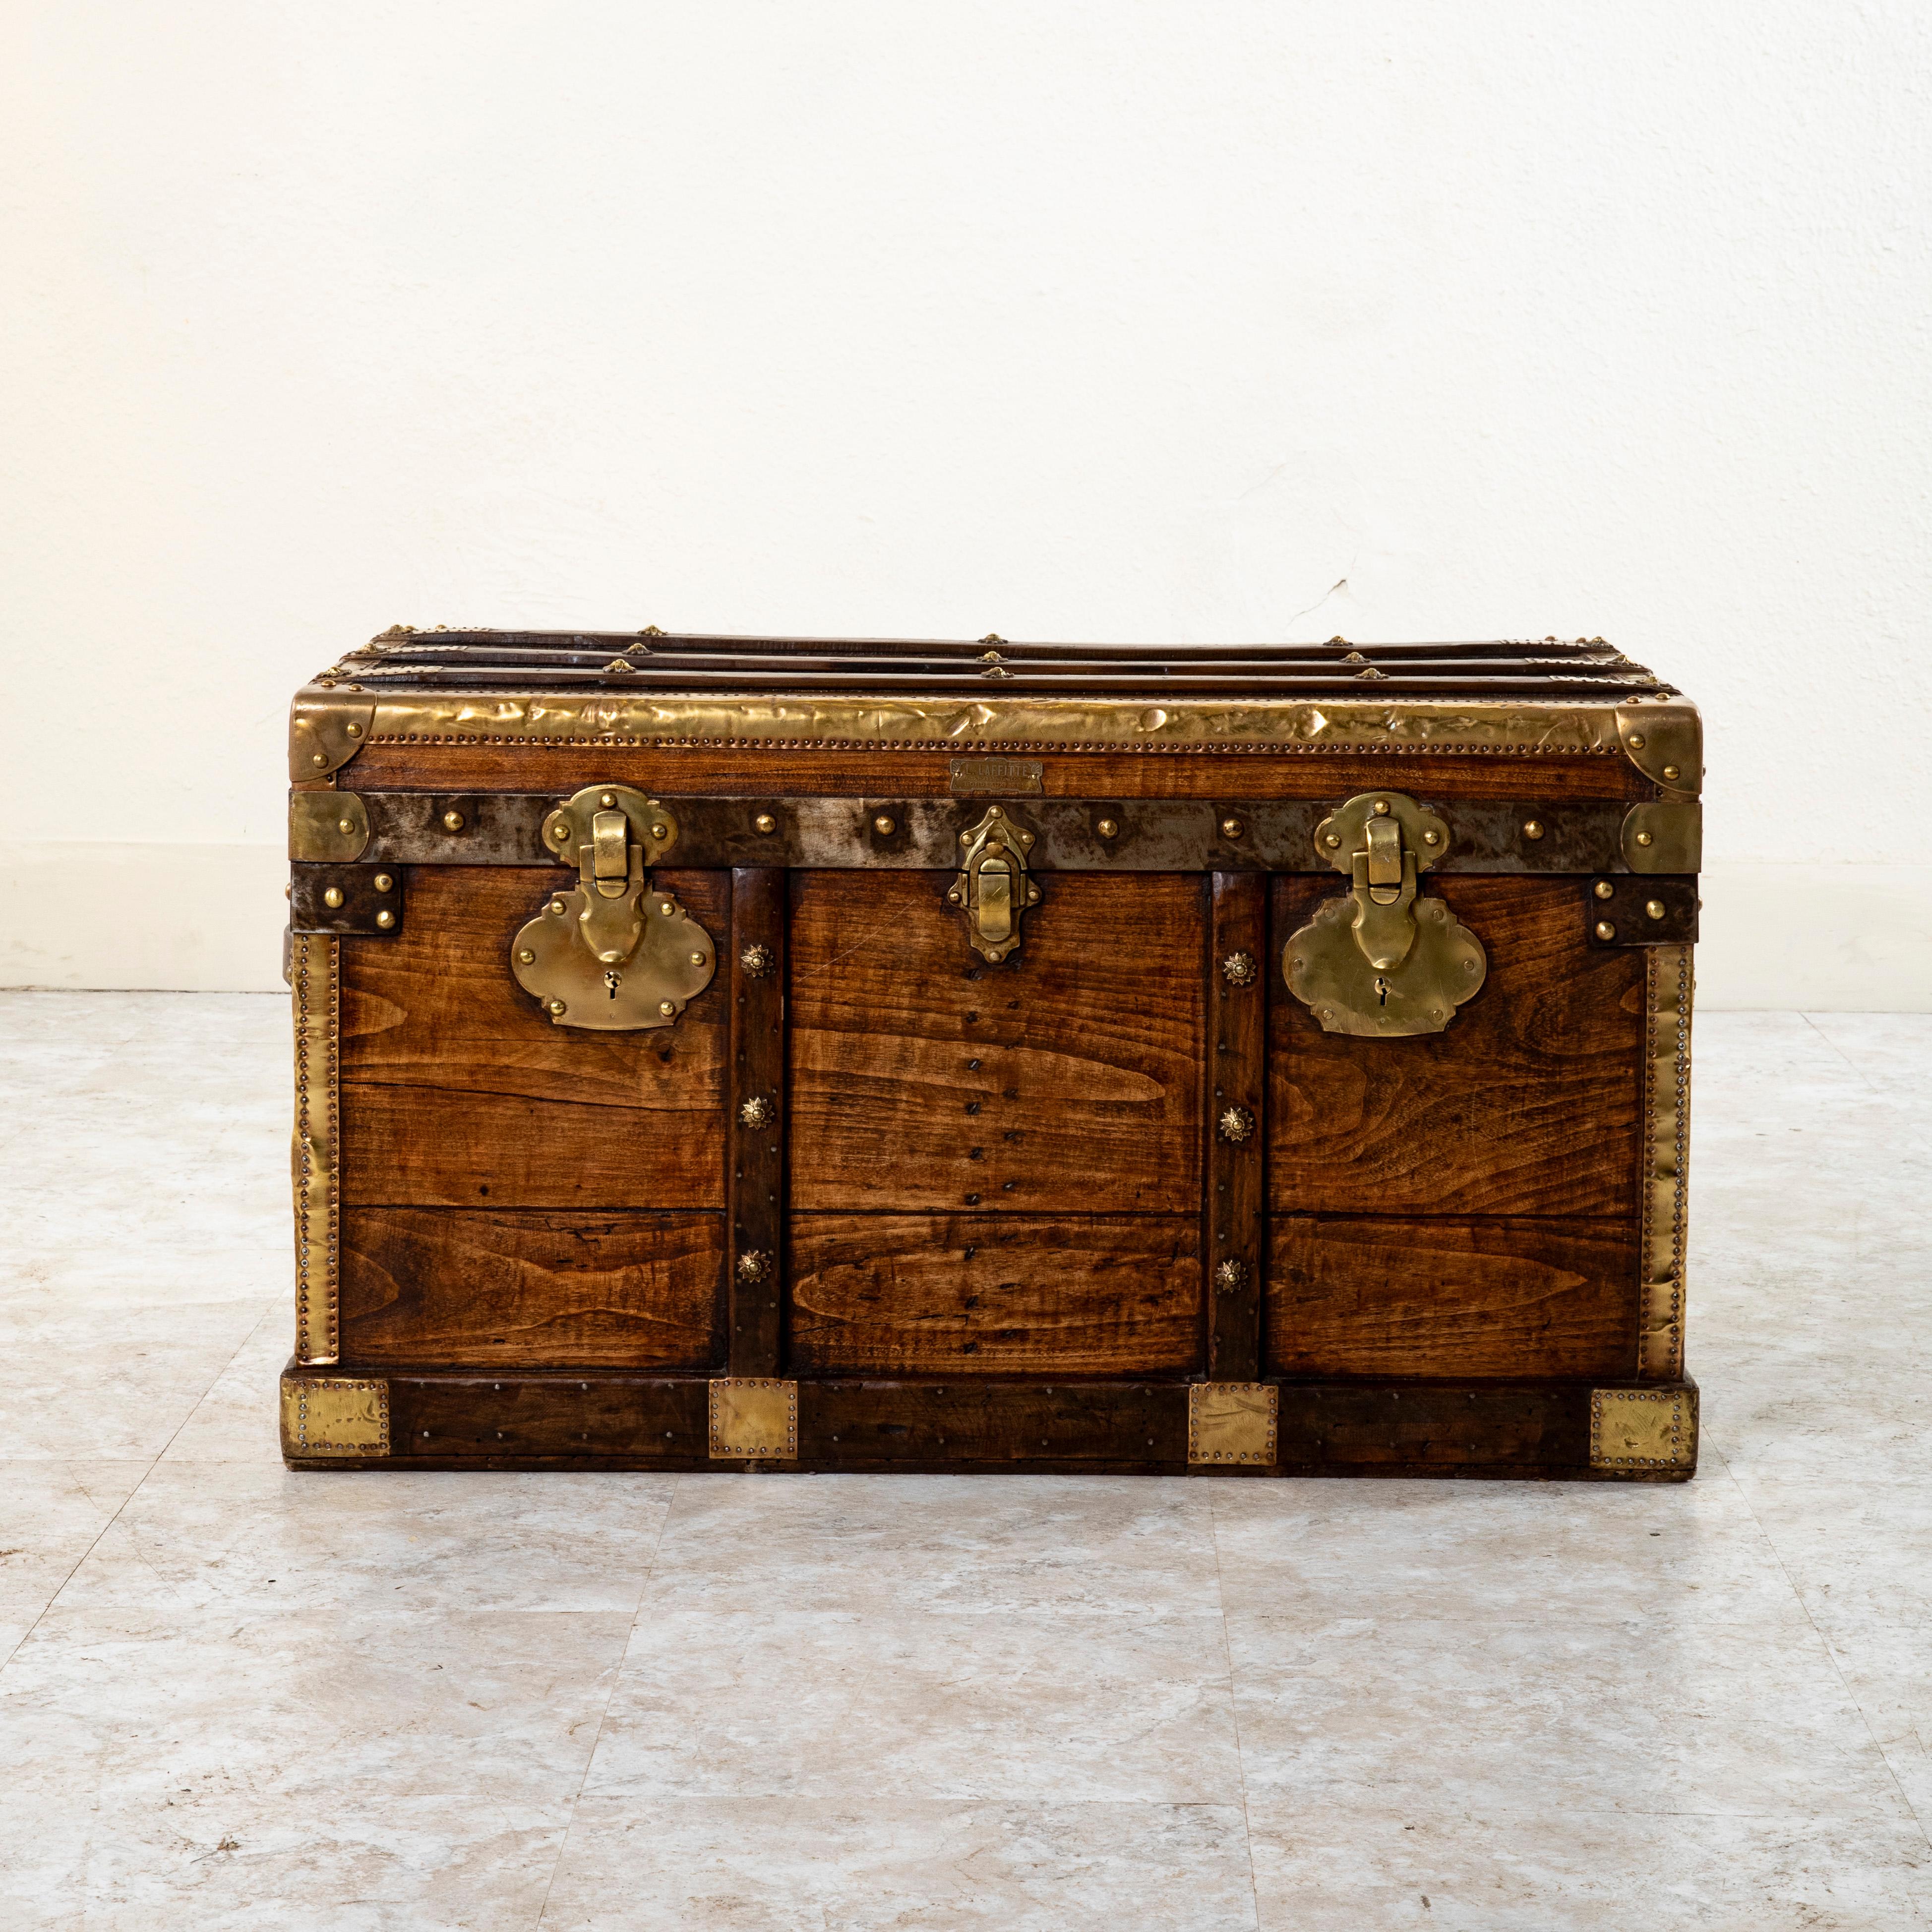 French Wooden Steam Trunk with Runners, Brass, Iron, Leather Details, circa 1880 In Good Condition For Sale In Fayetteville, AR